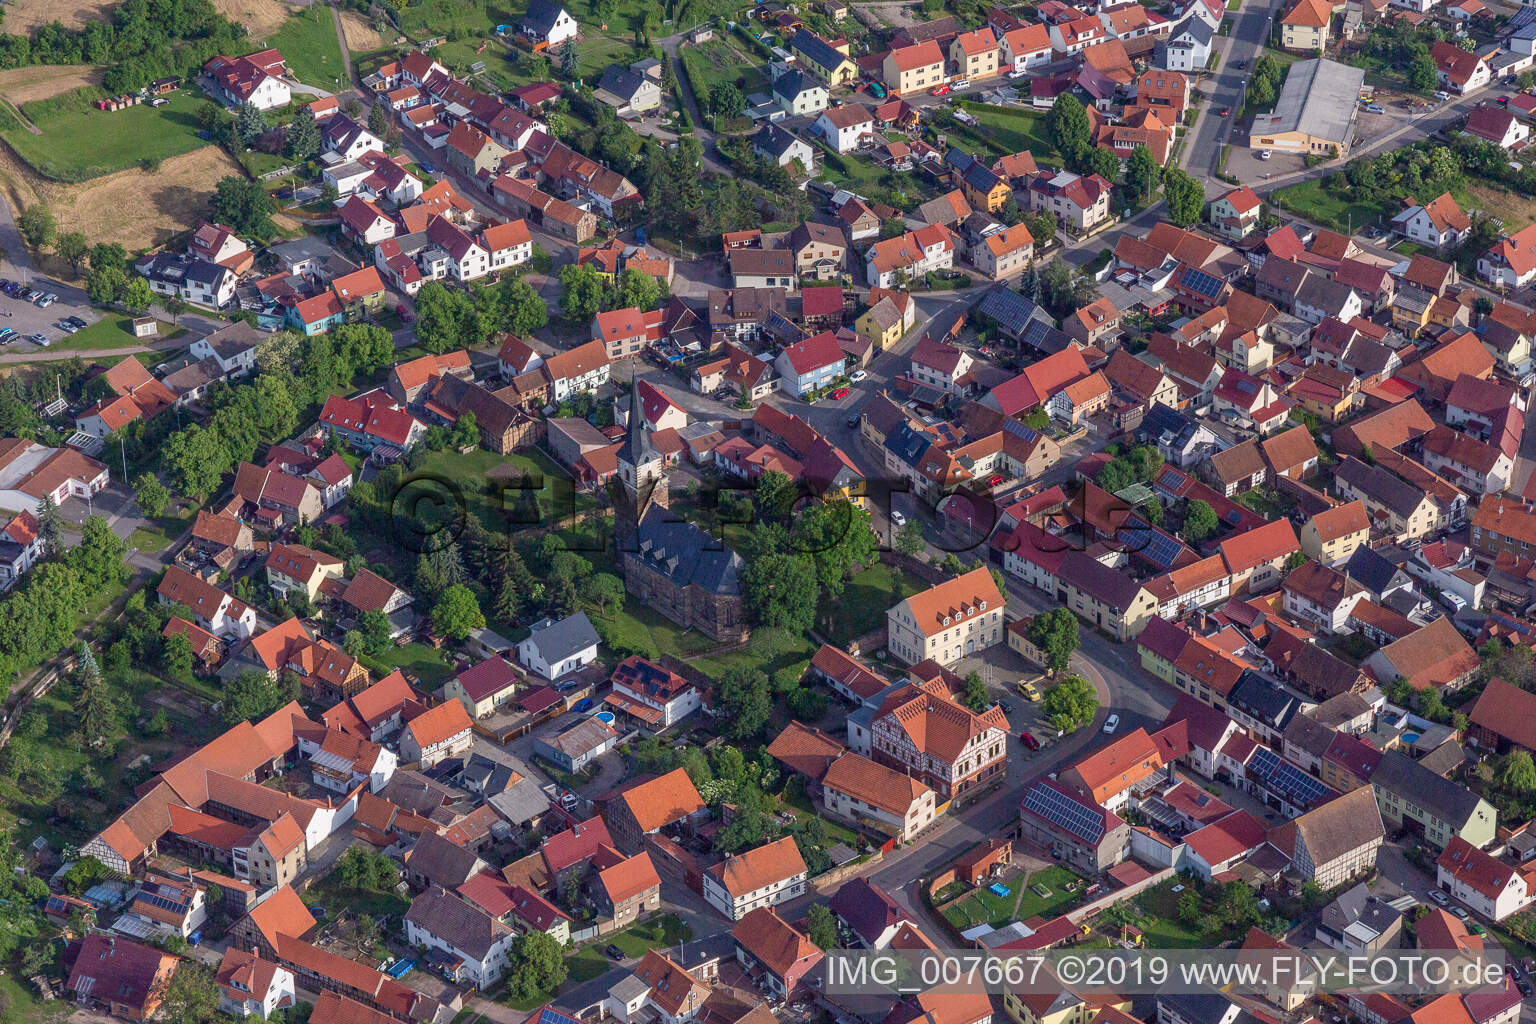 Oblique view of Town View of the streets and houses of the residential areas in Seebergen in the state Thuringia, Germany